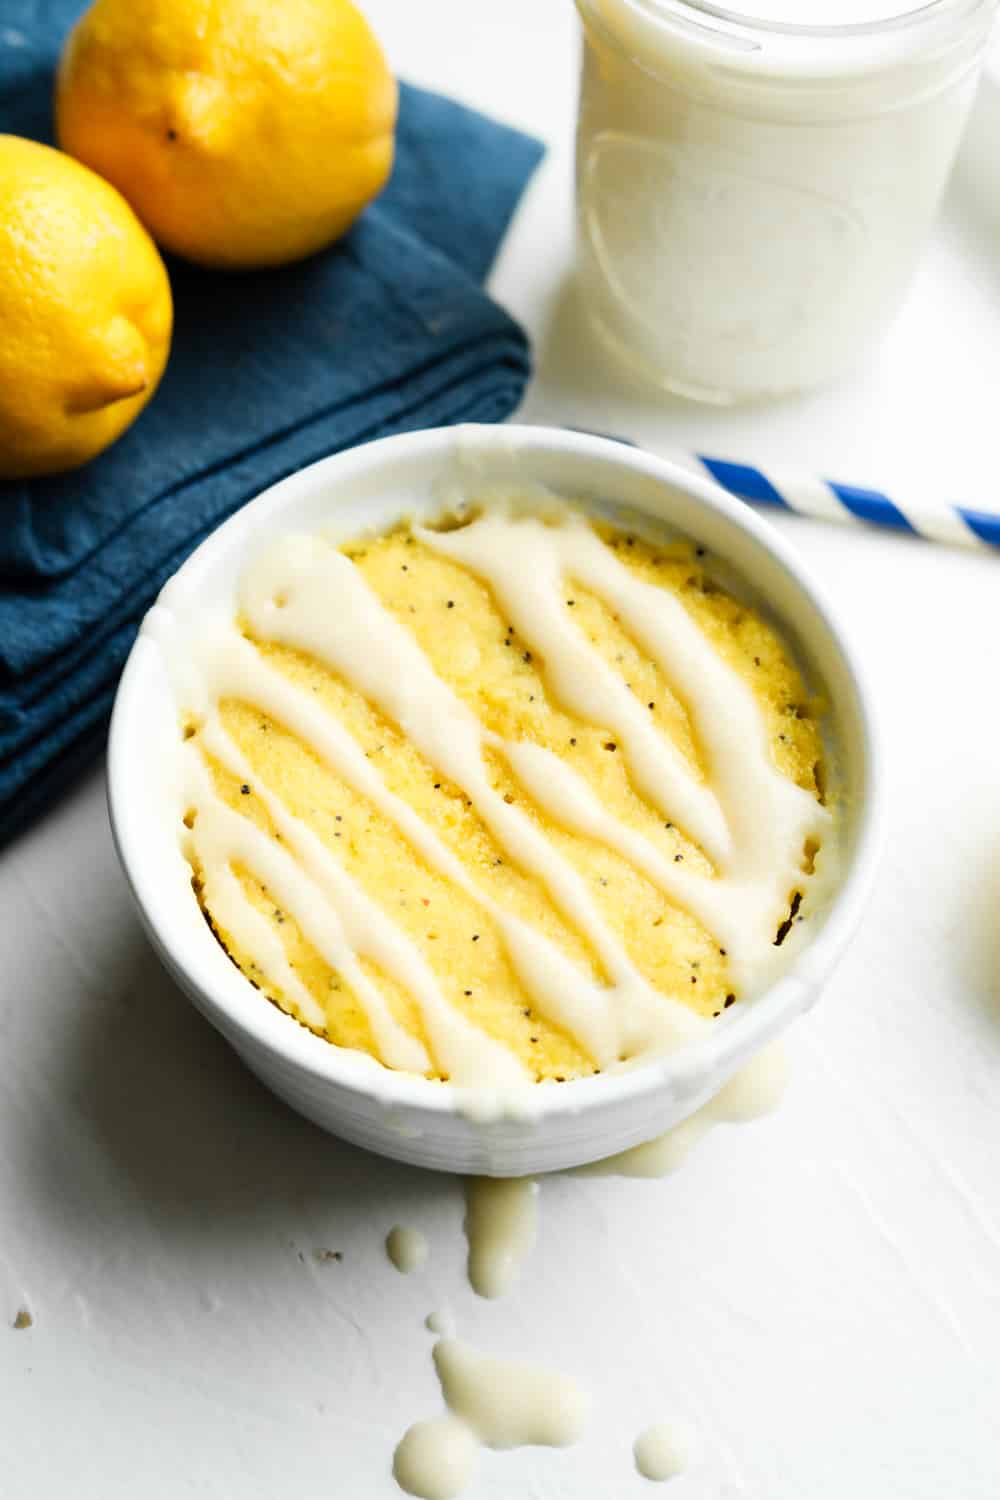 A lemon mug cake with a drizzle on top of it.